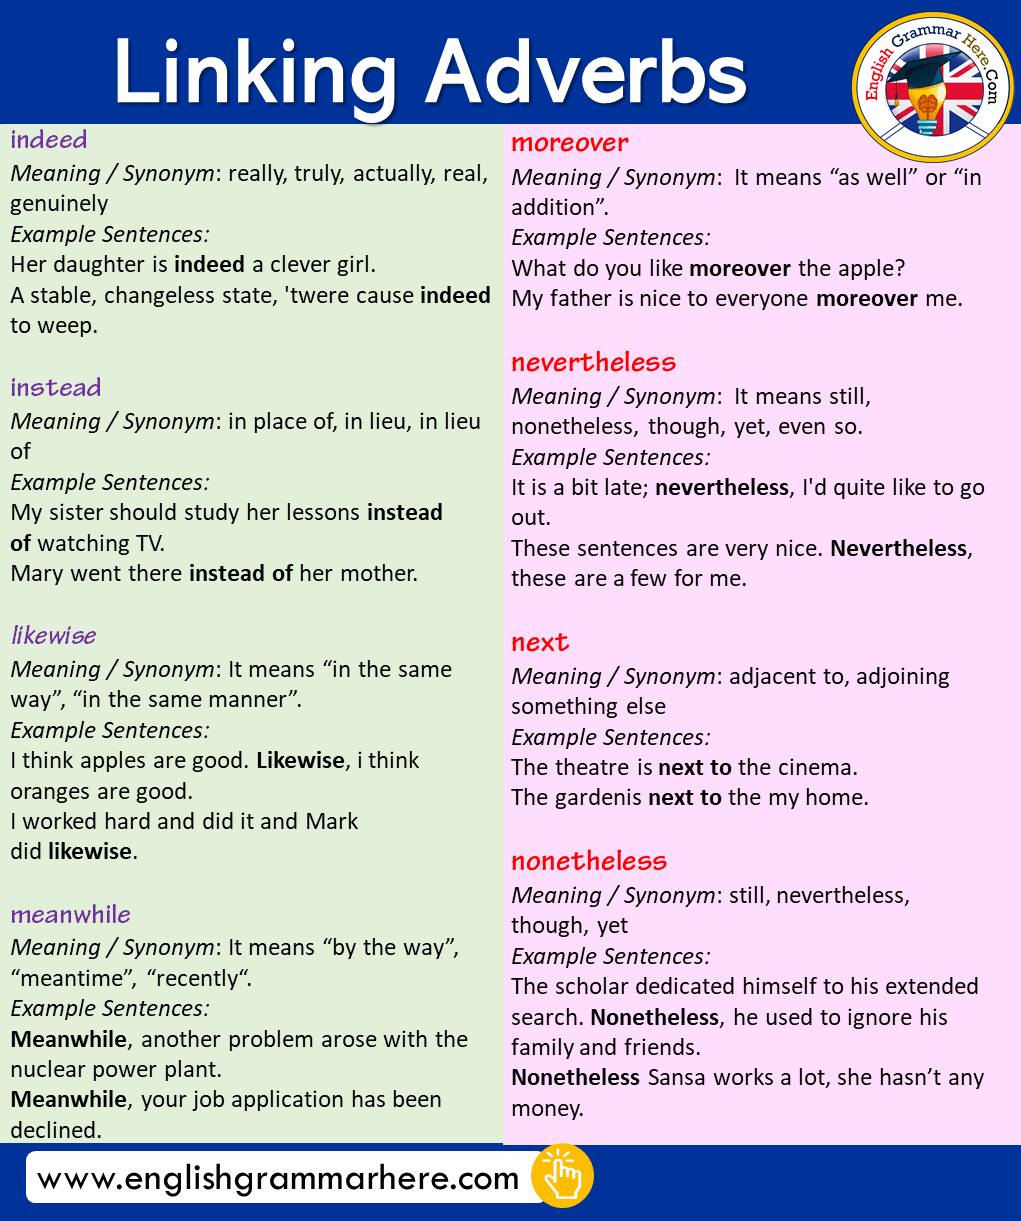 jump in undertake Reconcile Linking Adverbs and Transition Words - English Grammar Here